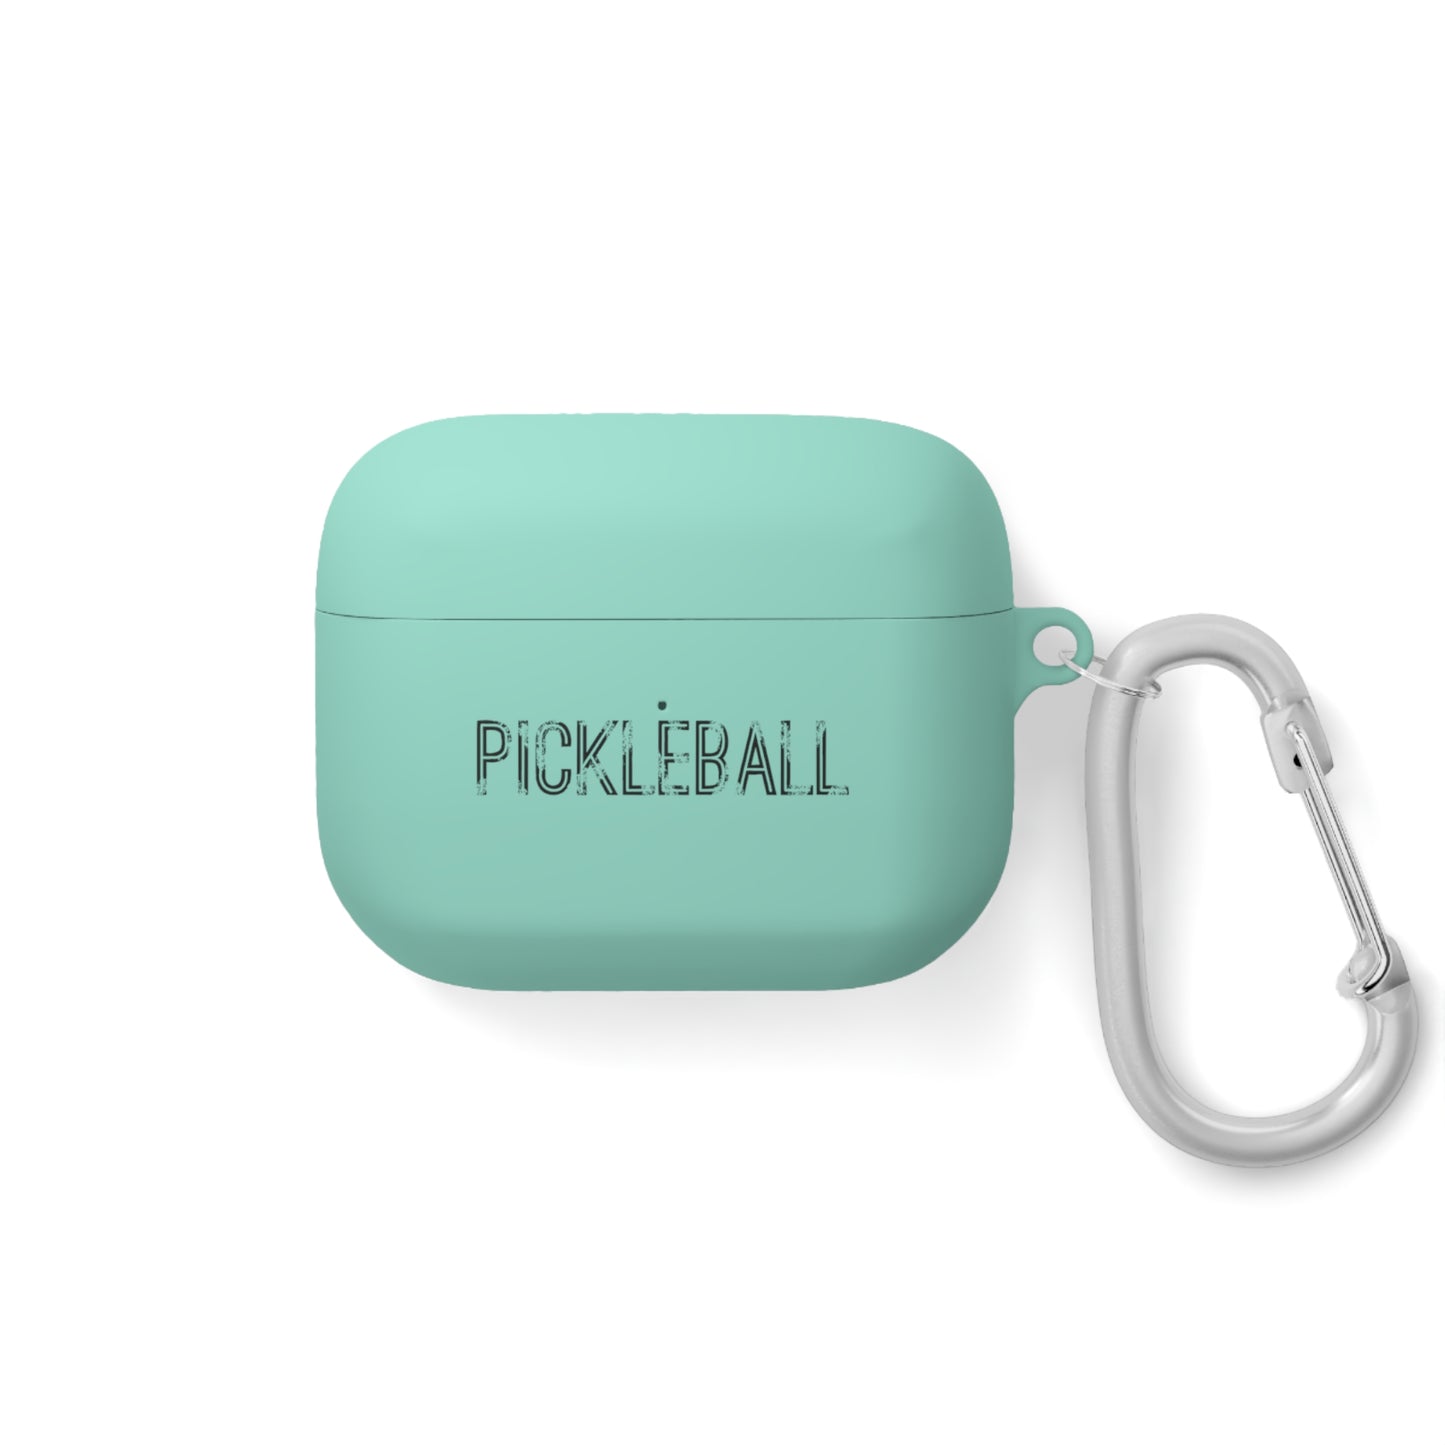 No Mercy Pickleball Series - AirPods Pro Case Cover